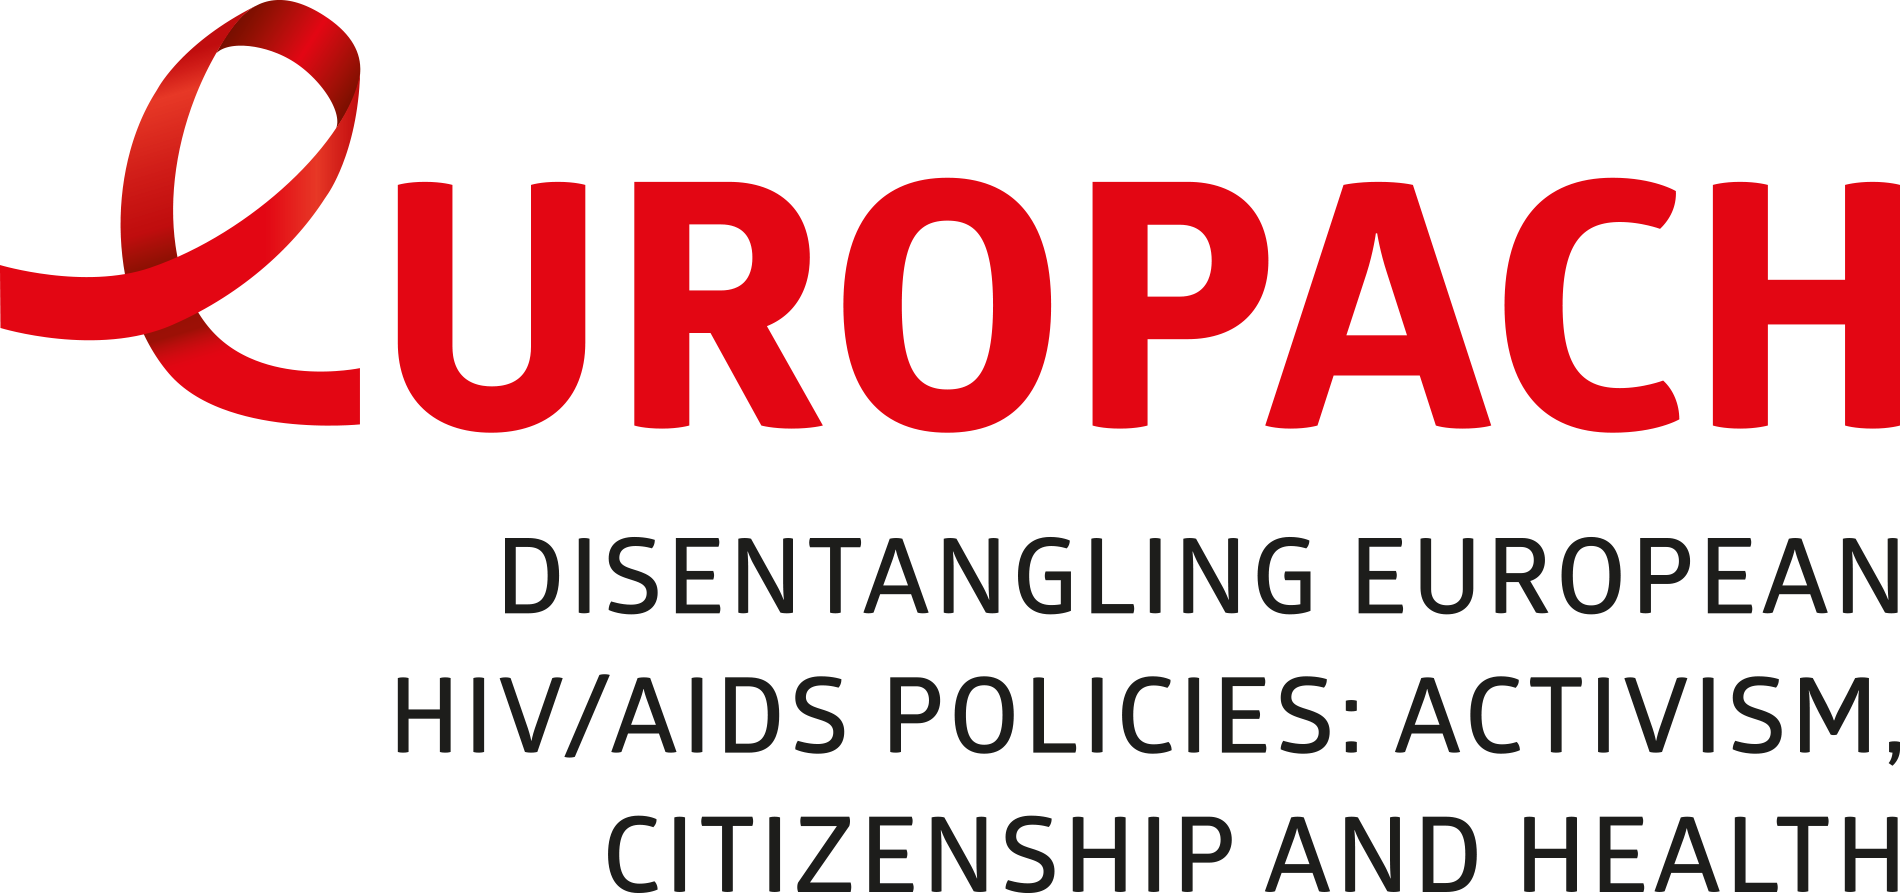 EUROPACH_logo_full-color.png